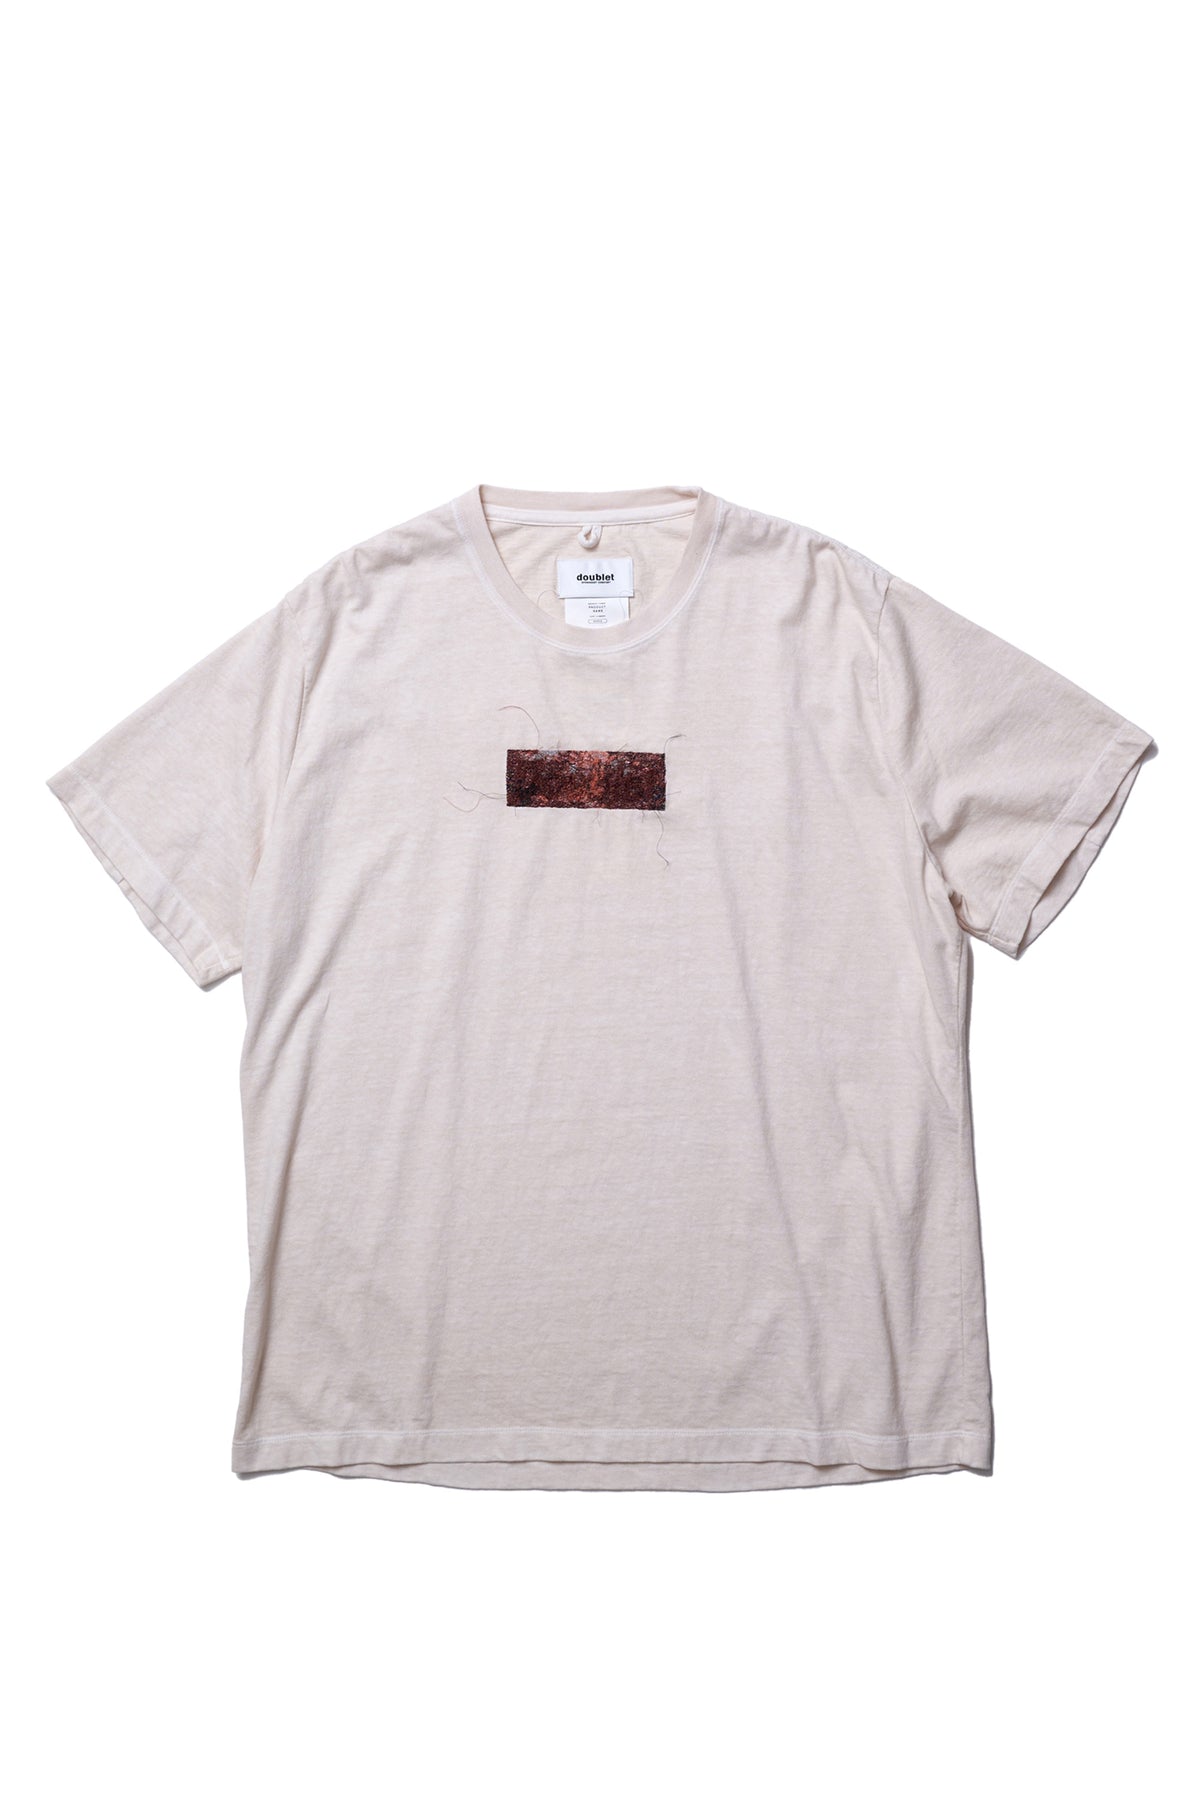 Doublet package cover shirt ダブレット-